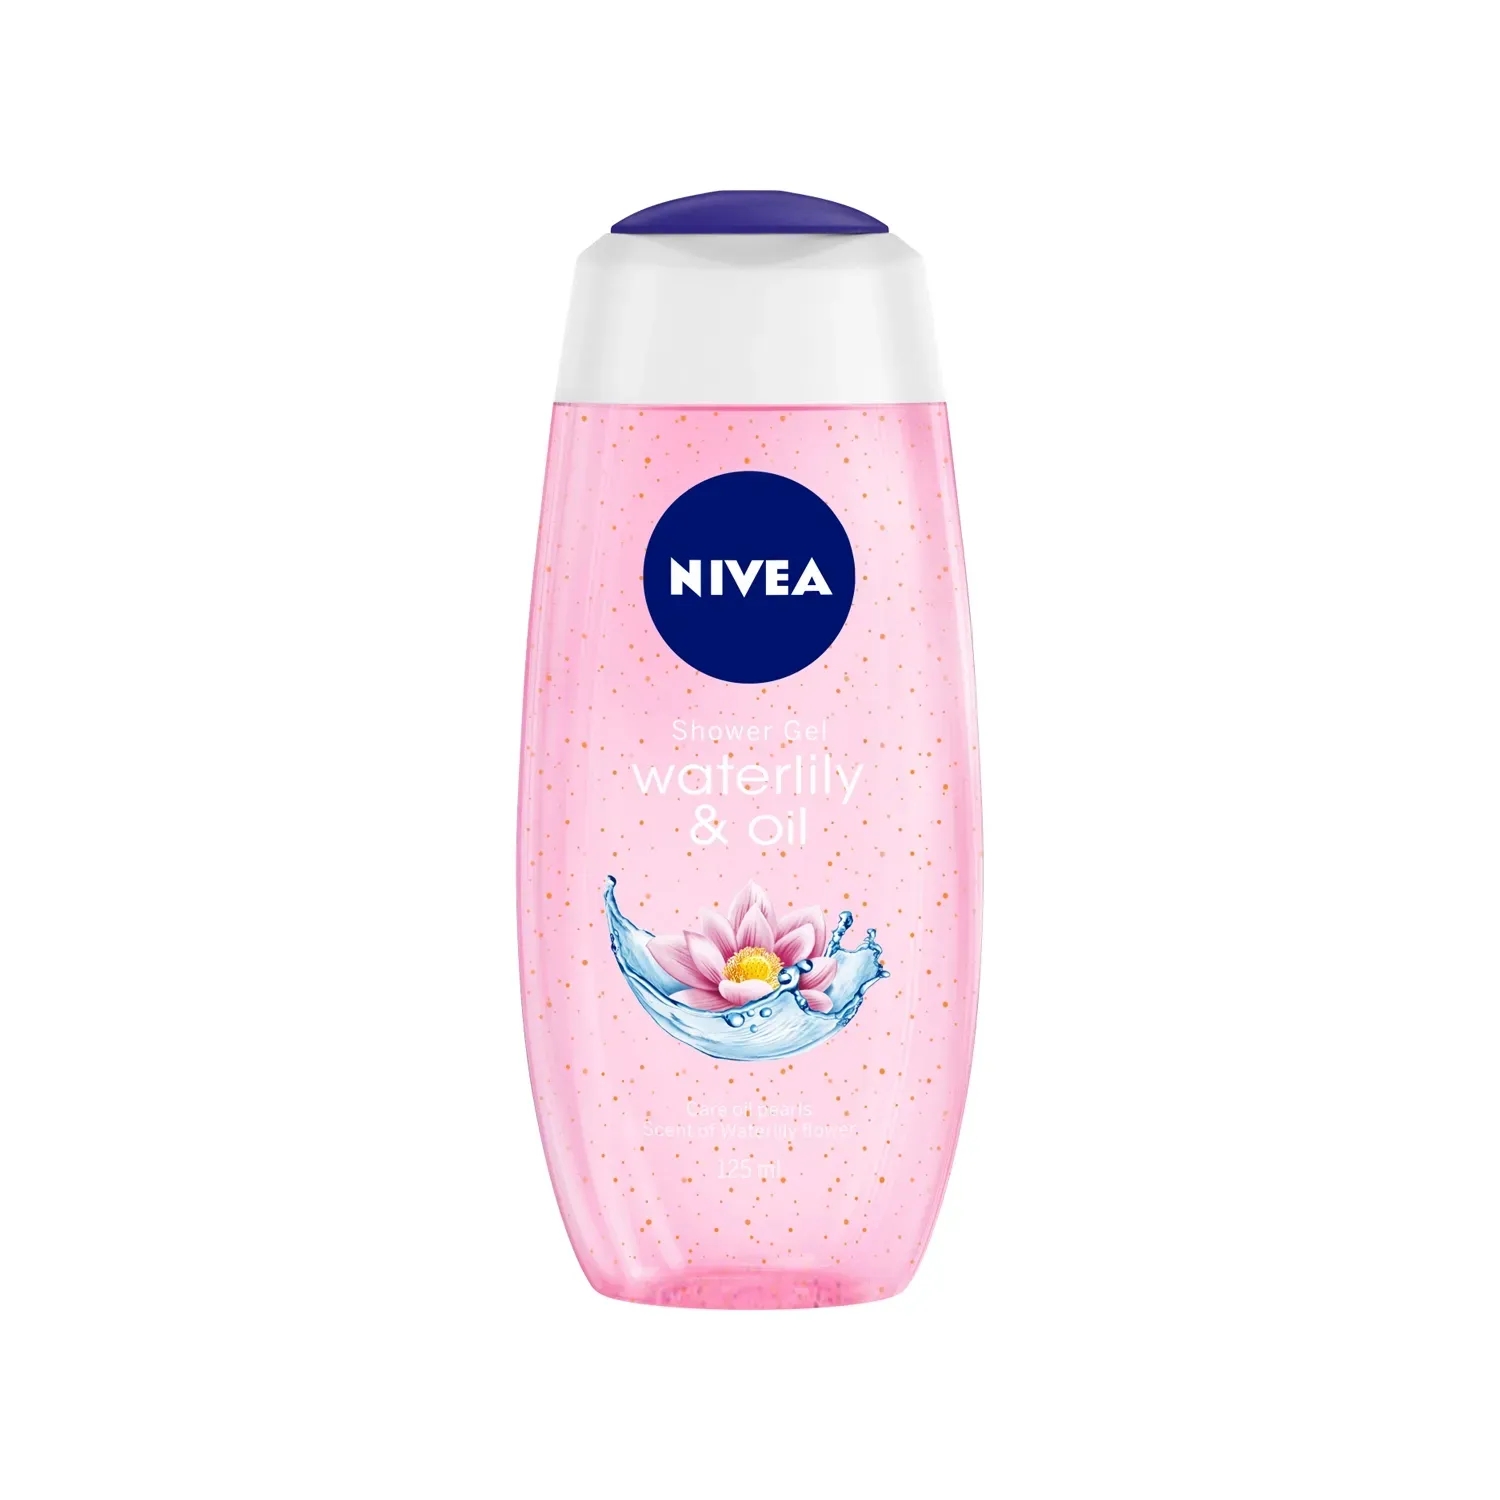 Nivea | Nivea Water Lily & Oil Body Wash And Shower Gel (125ml)